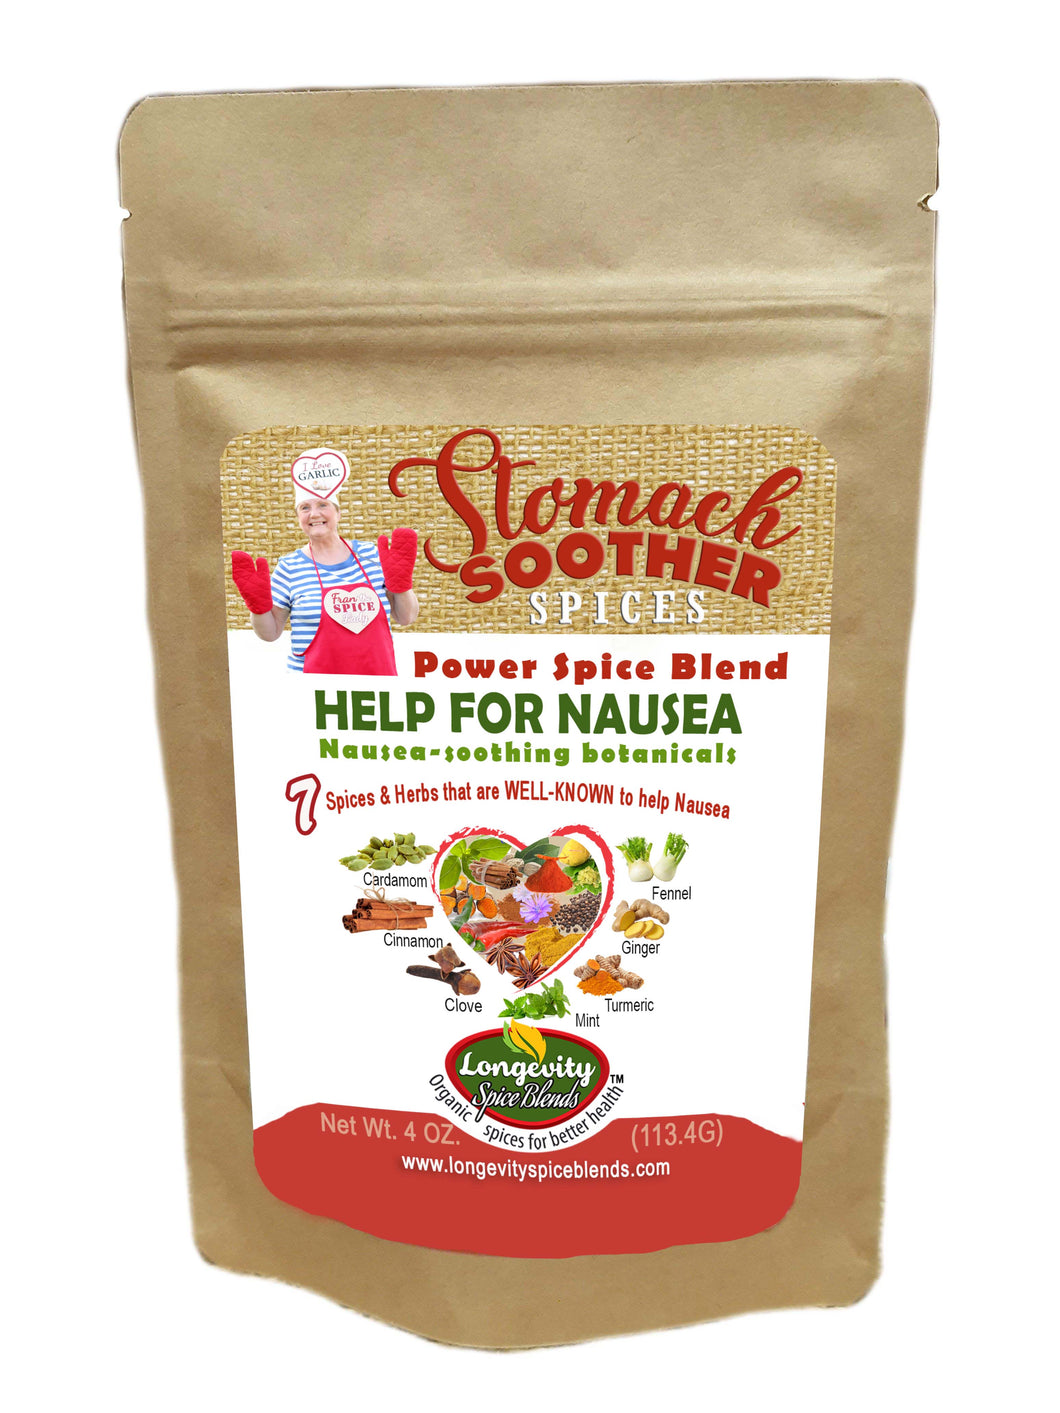 Nausea | Stomach Soother Spices - Nausea Spices & Herbs to Soothe Stomach Naturally